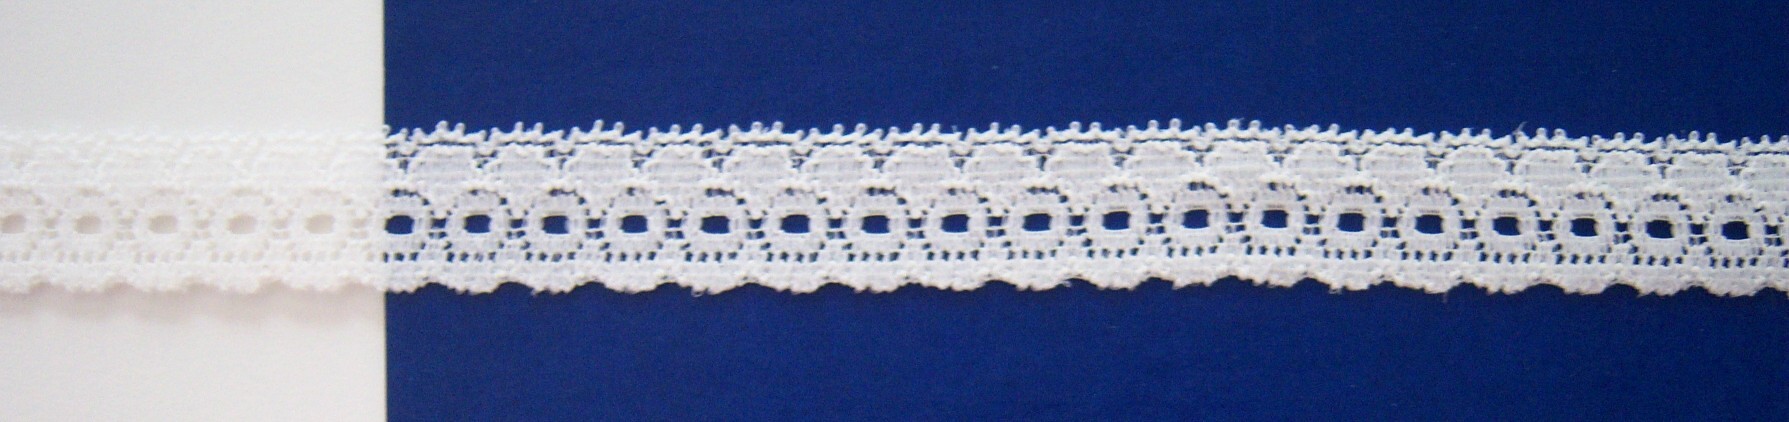 Star White 3/4" Stretch Lace